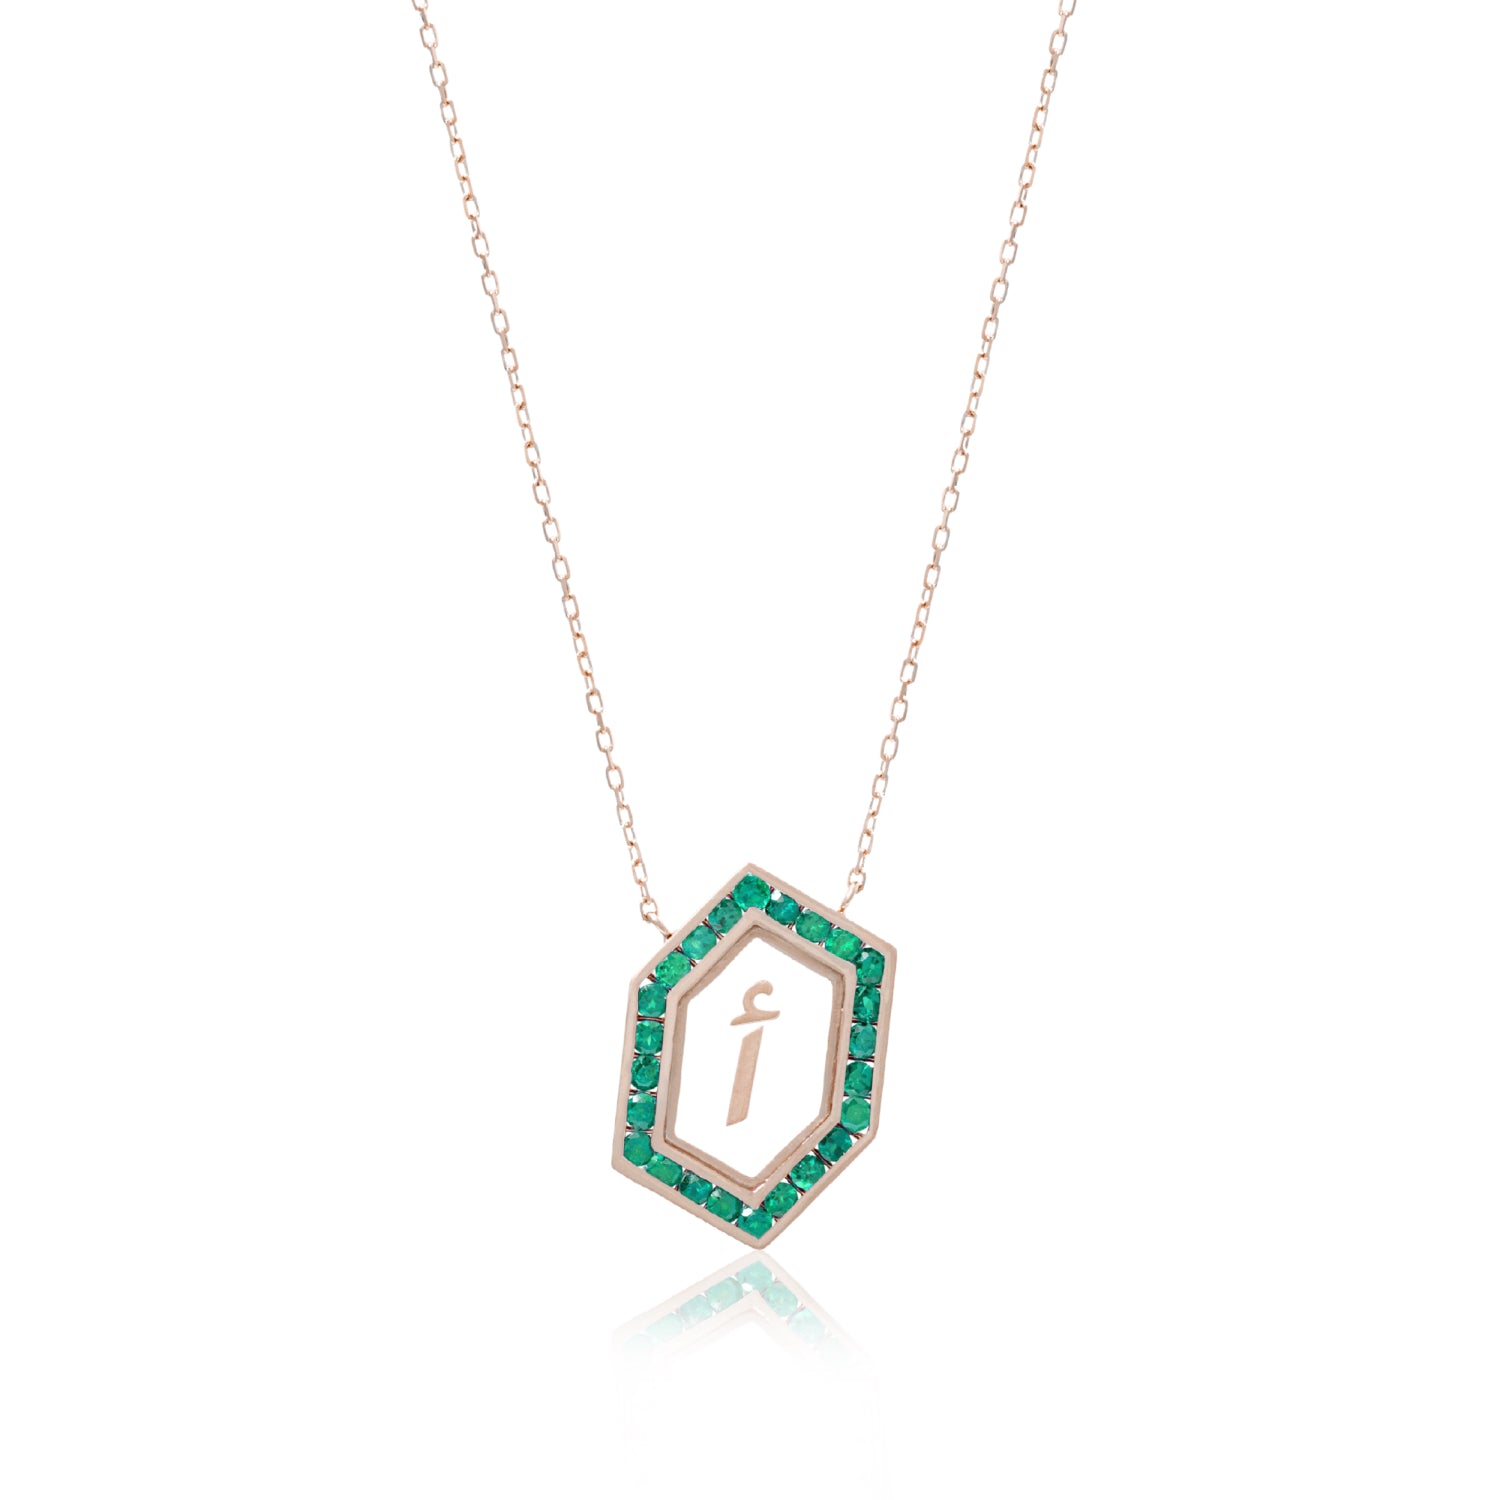 Qamoos 1.0 Letter أ Emerald Necklace in Rose Gold